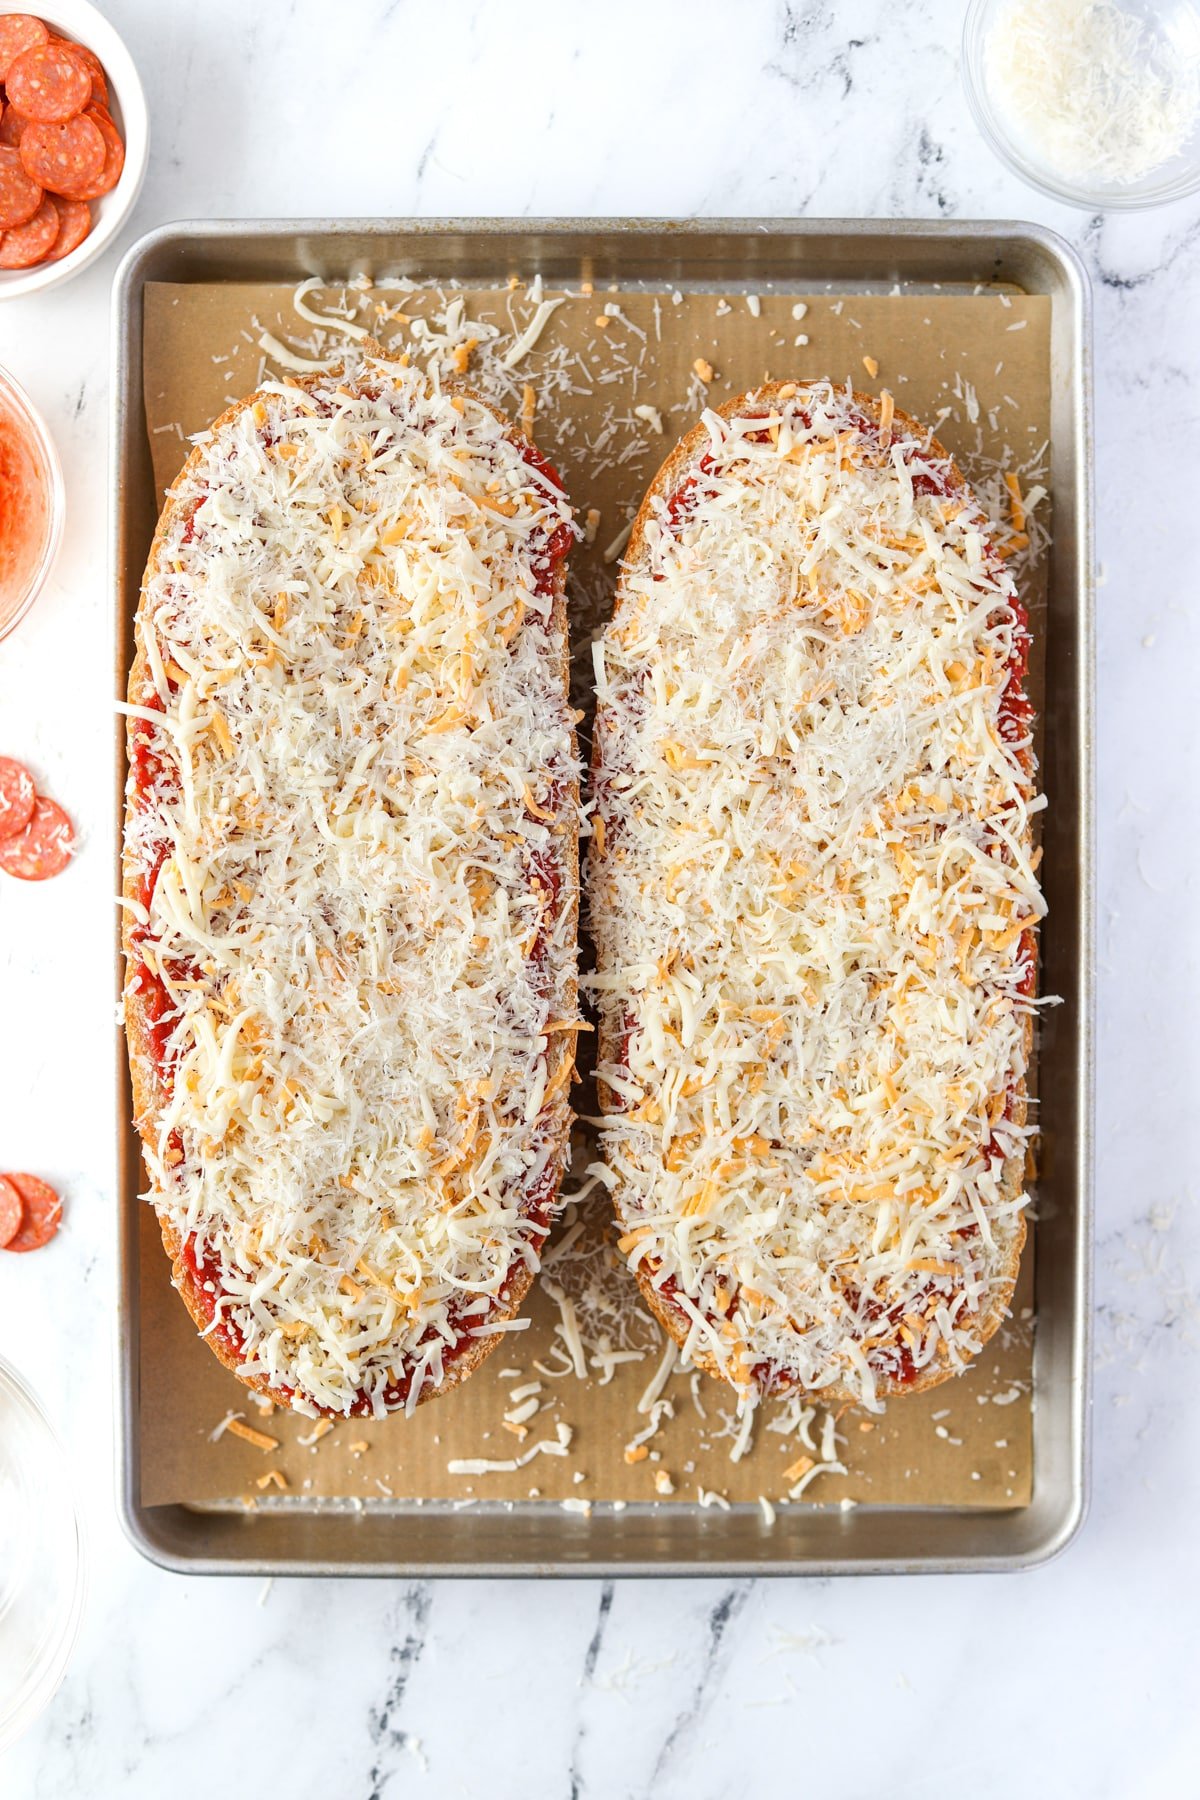 French bread topped with shredded cheese.